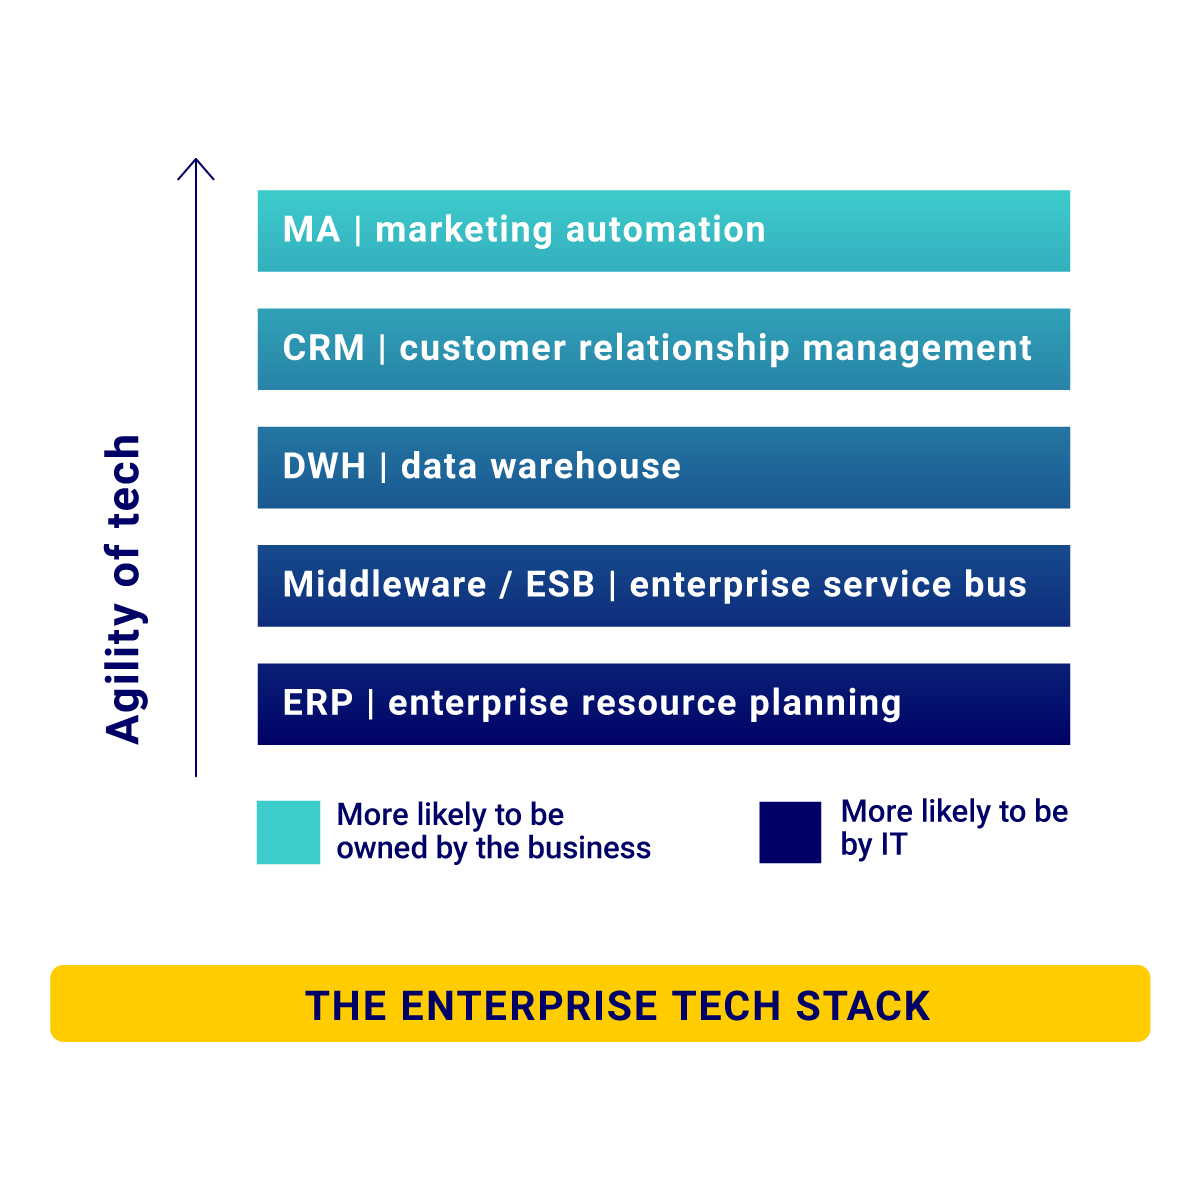 A high-level overview of a typical enterprise tech stack.  Note how marketing automation tech is more agile and more likely to be owned by the business.